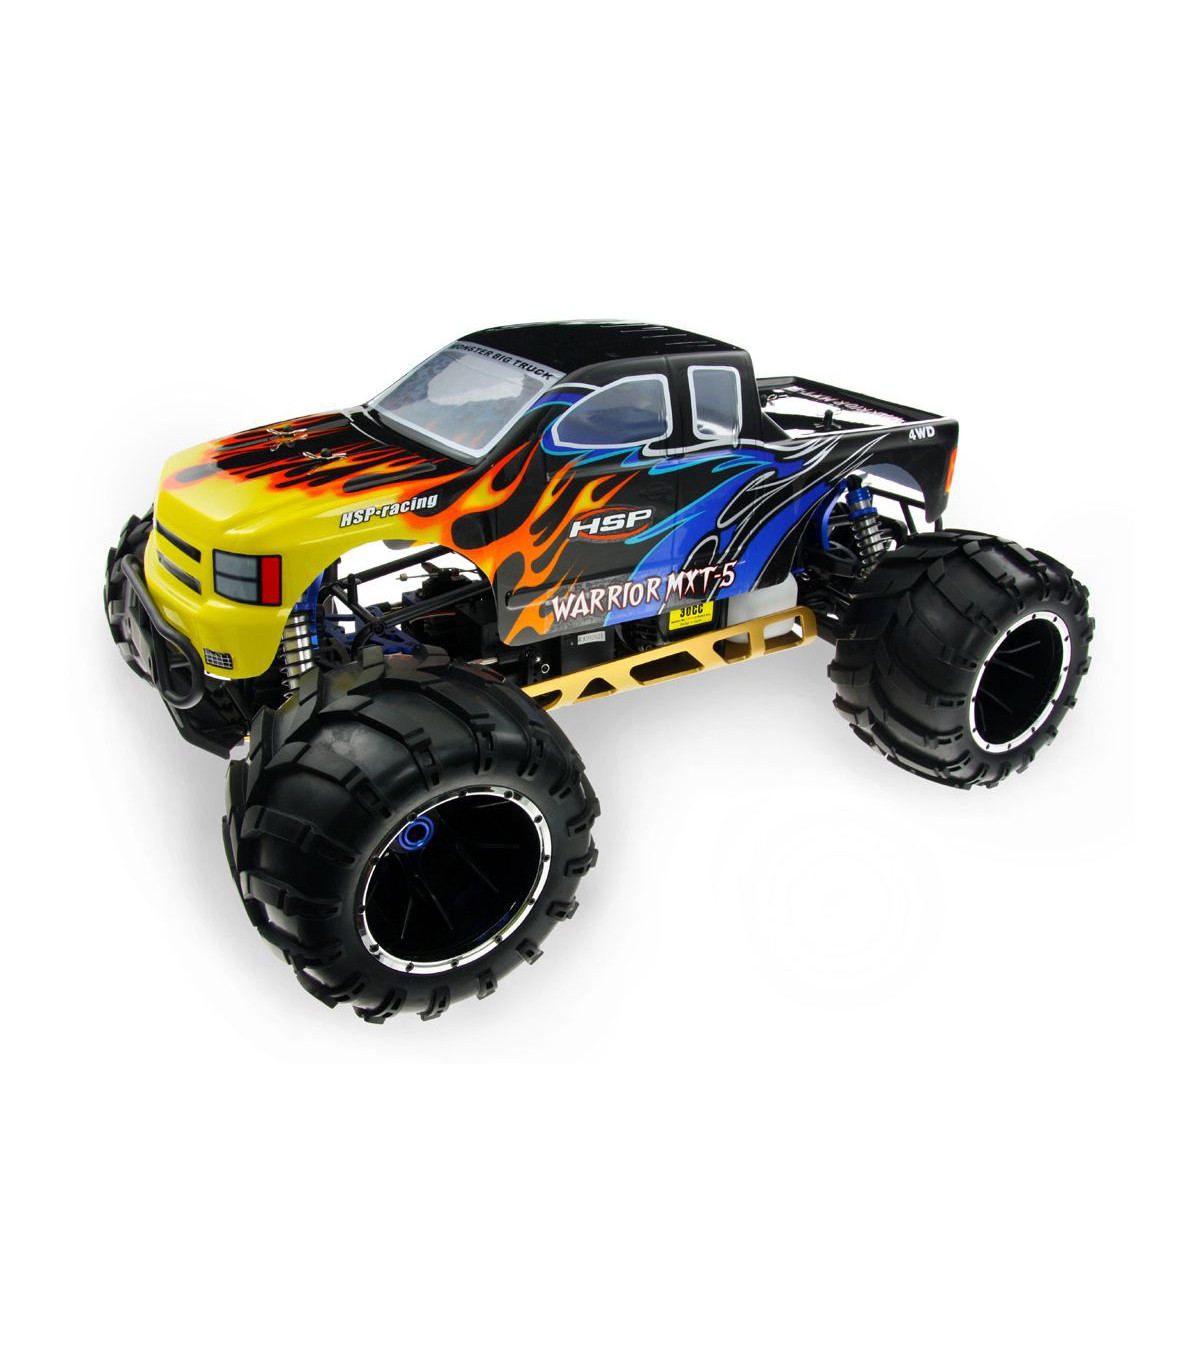 Coche RC Skeleton Monster 1/5 Gasolina 4WD R.T.R.